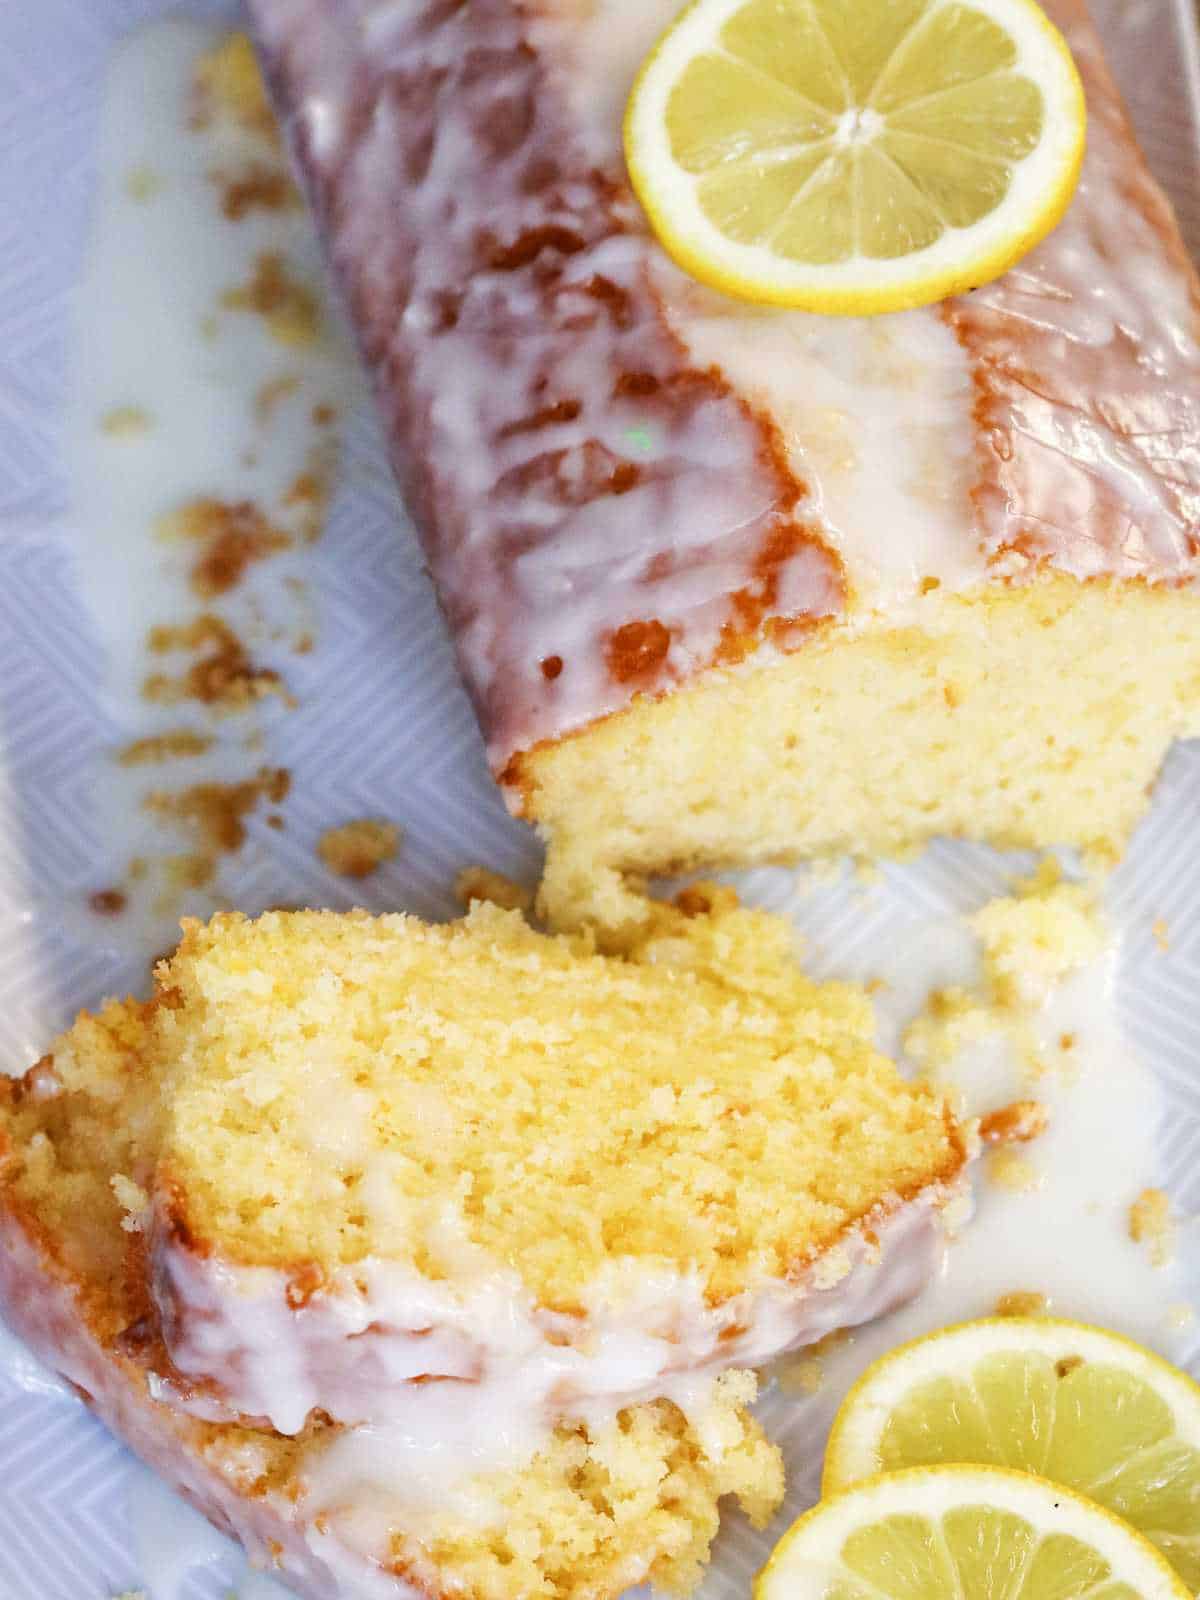 lemon loaf cake with icing drizzled on top.